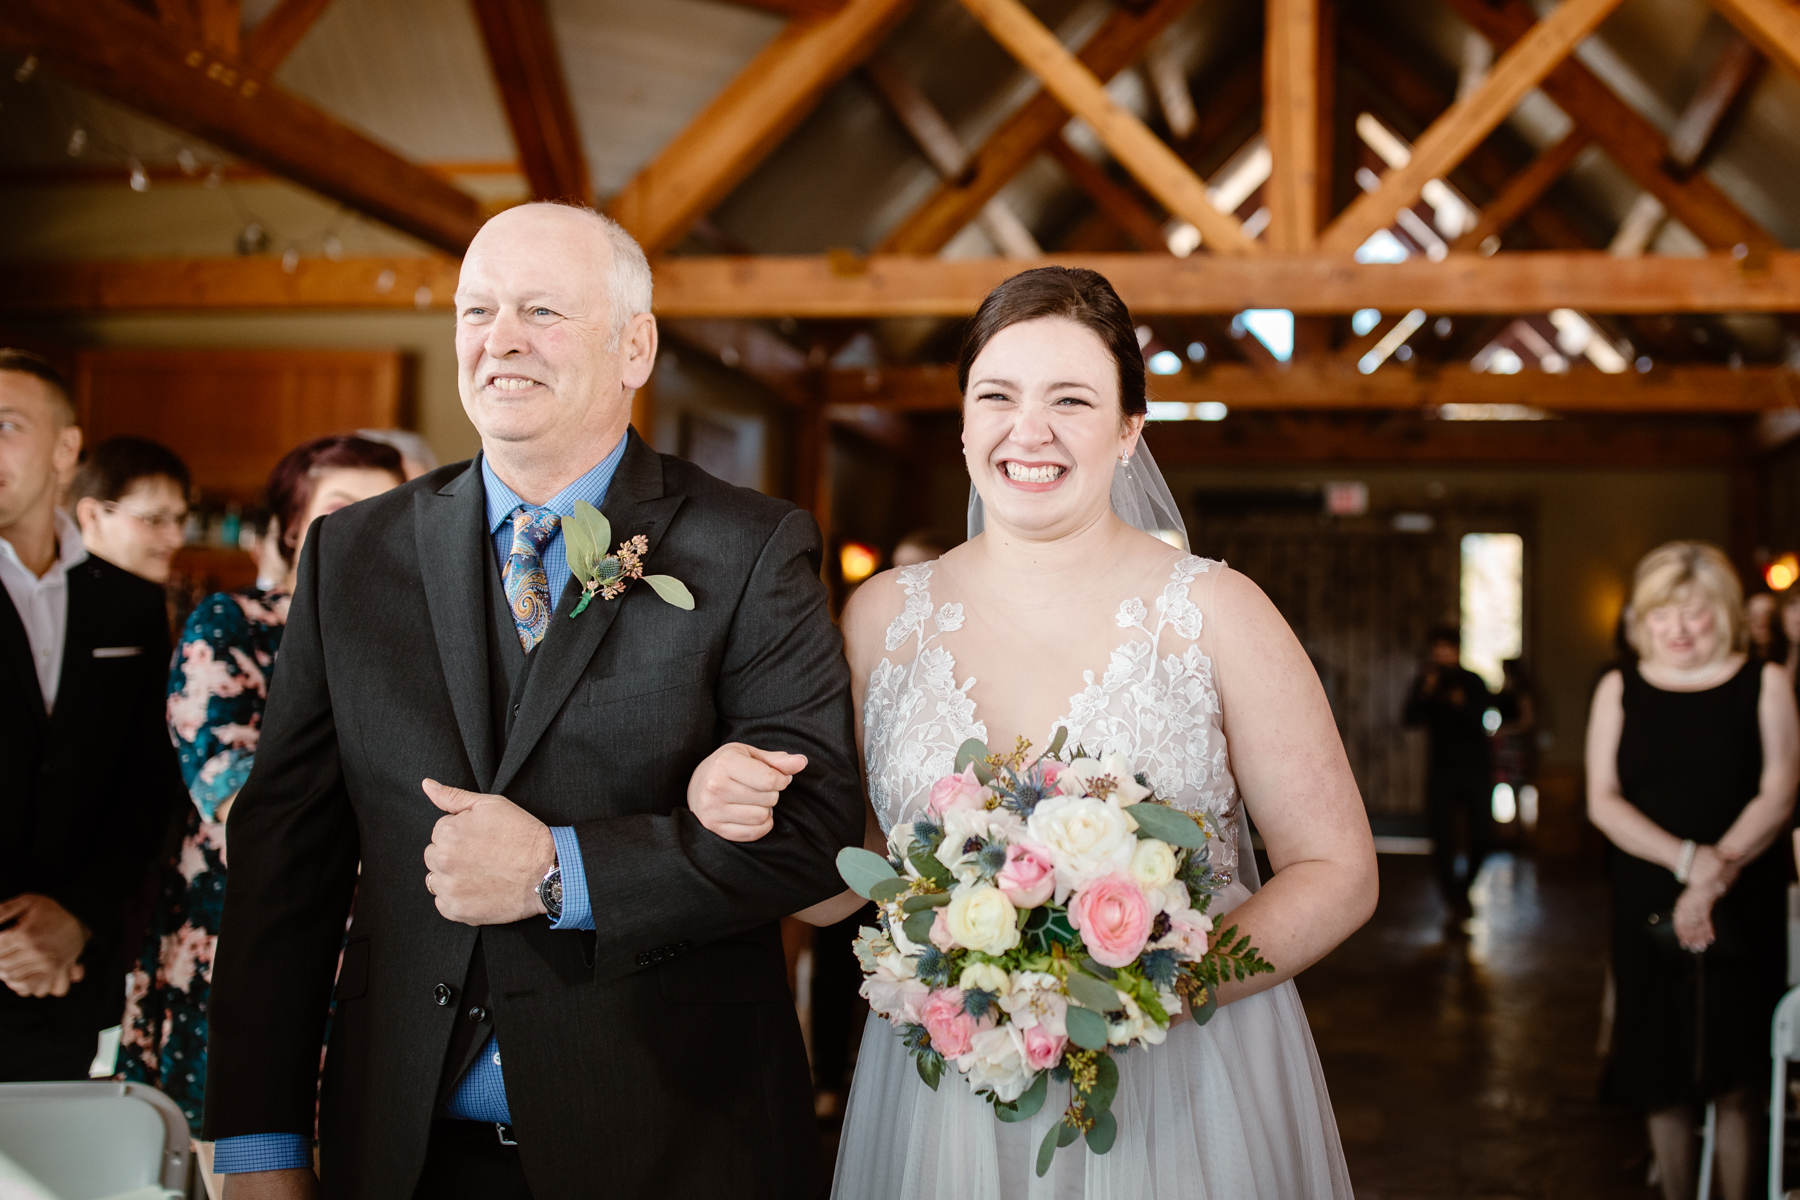 Invermere Wedding Photographers at Eagle Ranch and Panorama Ski Resort - Image 23